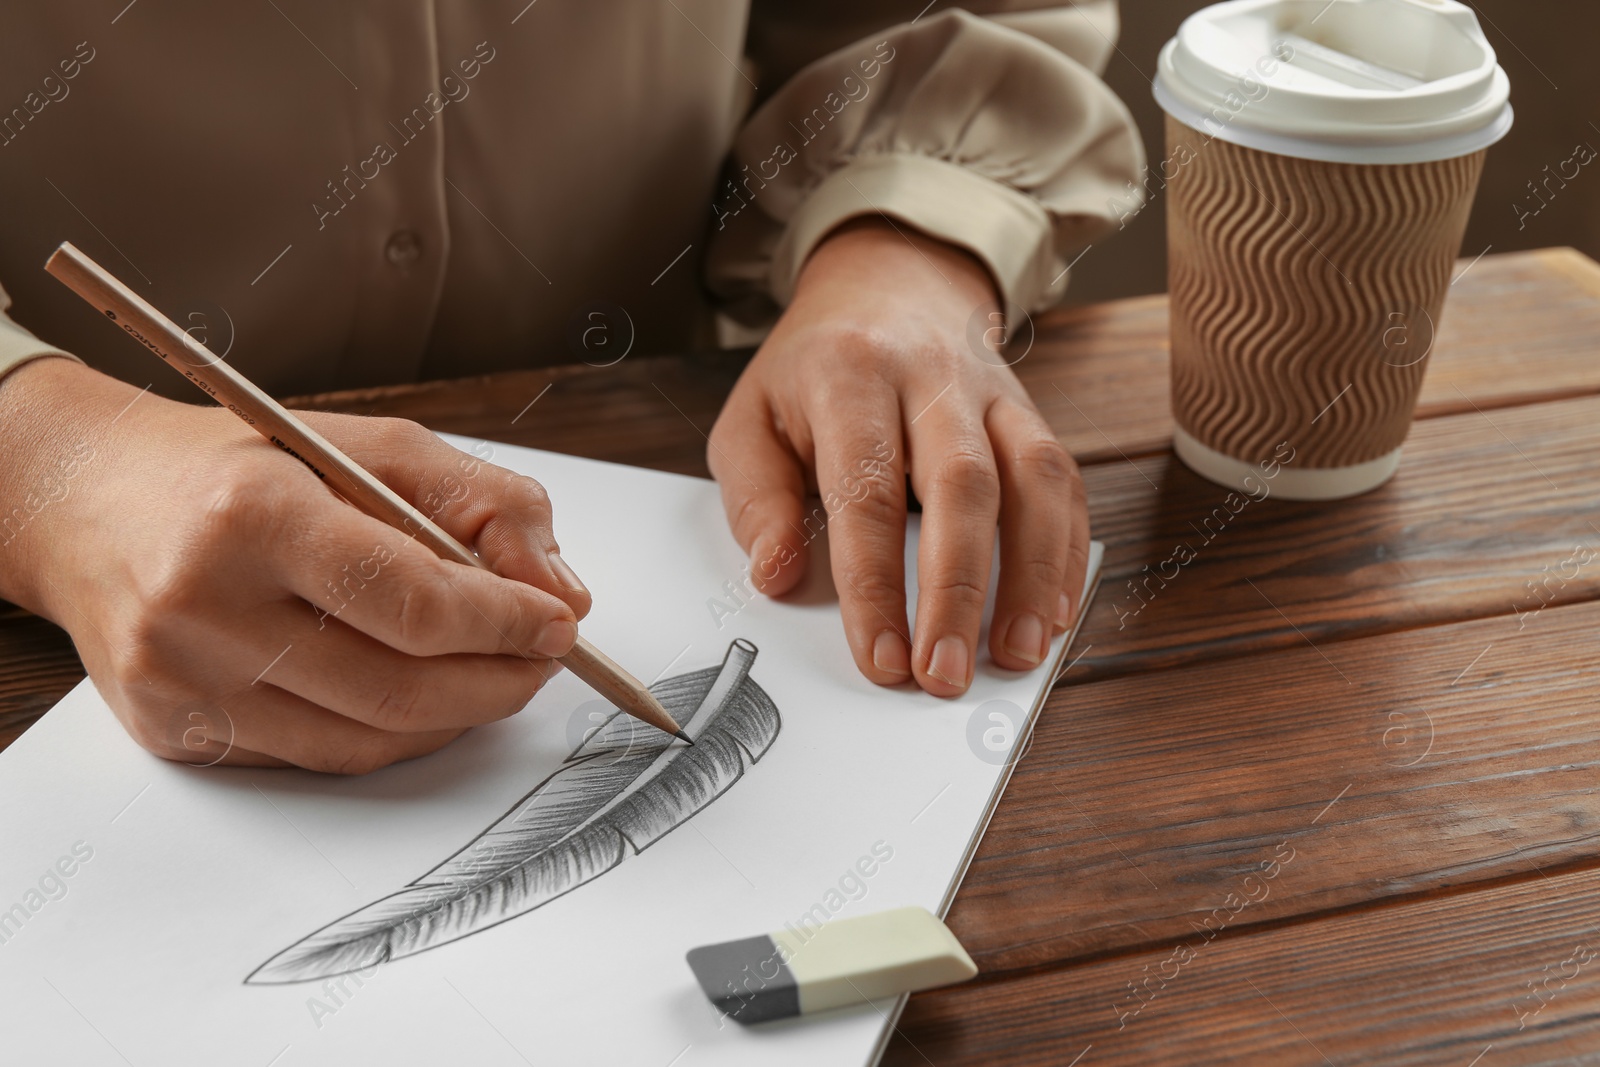 Photo of Woman drawing feather with graphite pencil in sketchbook at wooden table, closeup